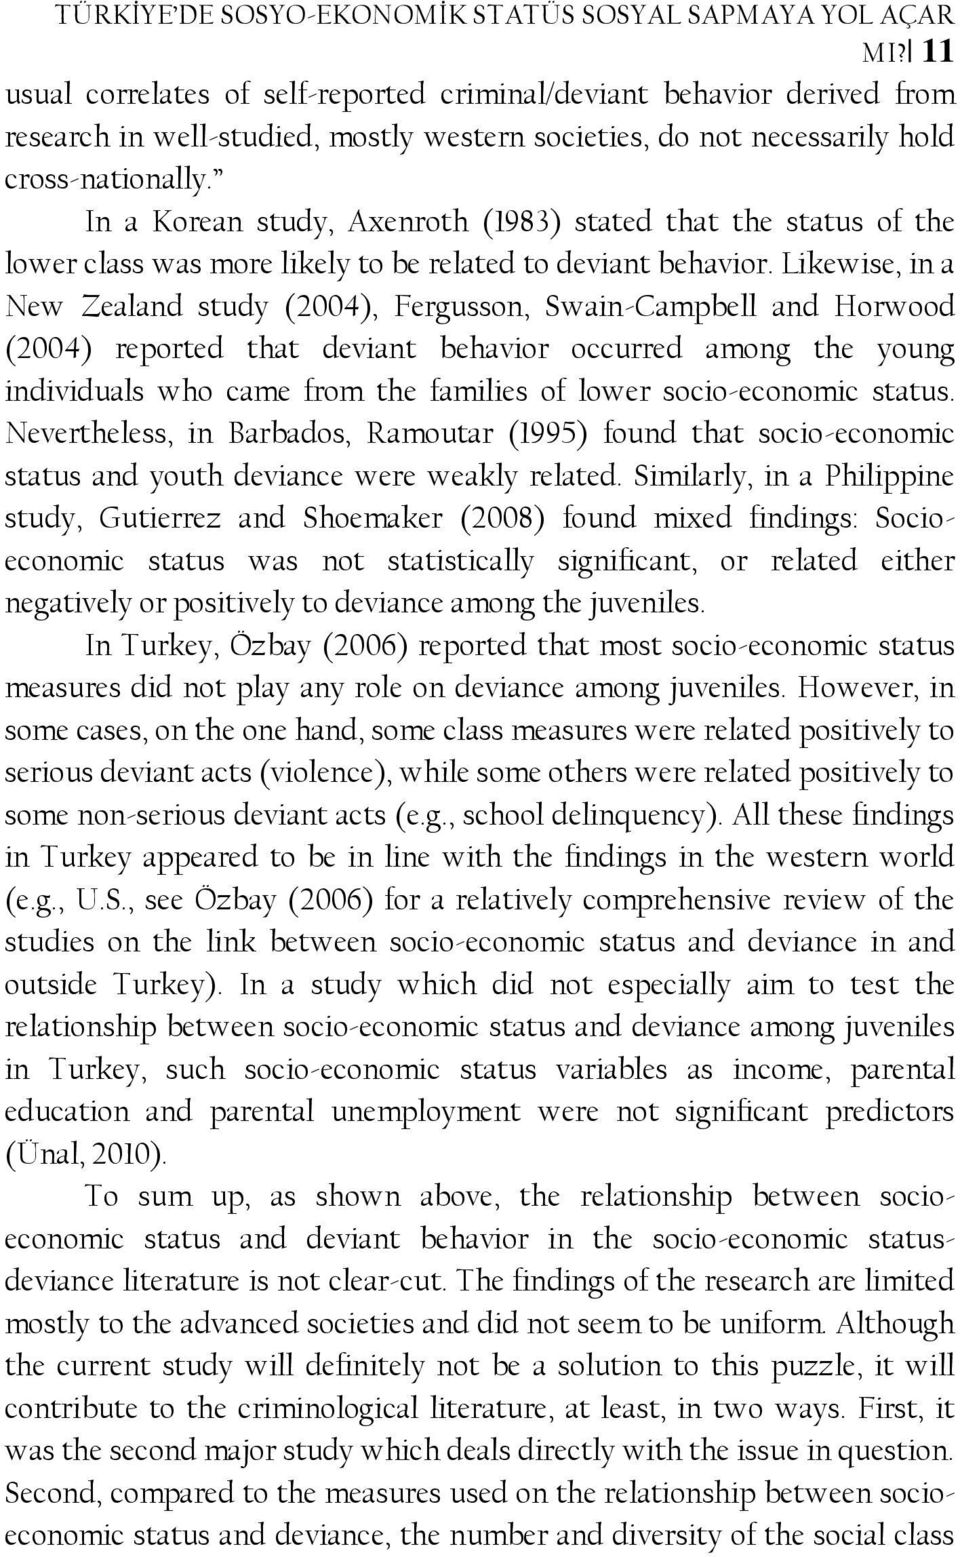 In a Korean study, Axenroth (1983) stated that the status of the lower class was more likely to be related to deviant behavior.